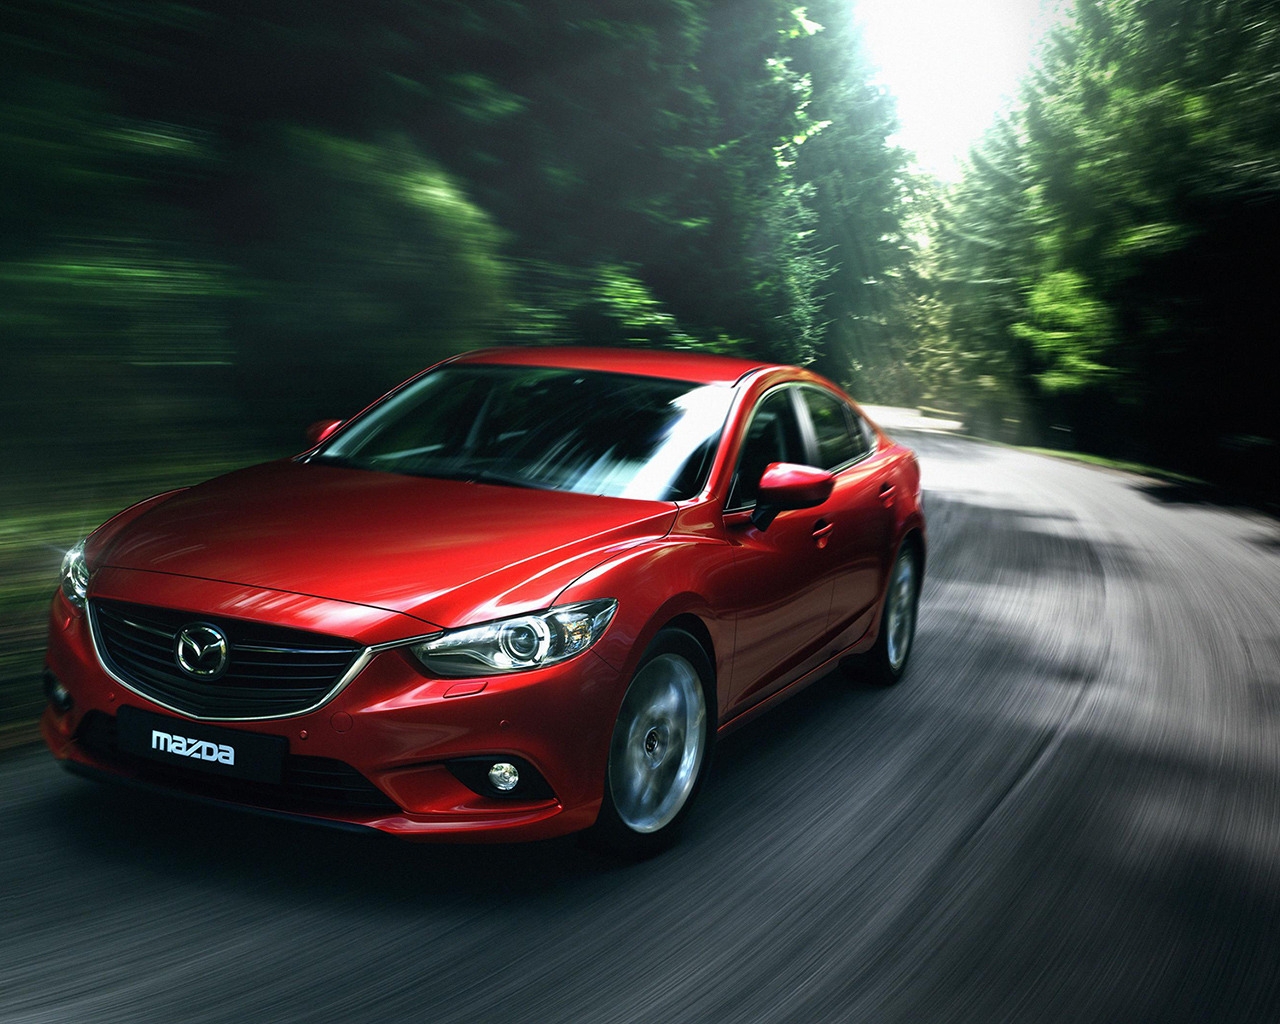 Gorgeous Red Mazda 6 for 1280 x 1024 resolution